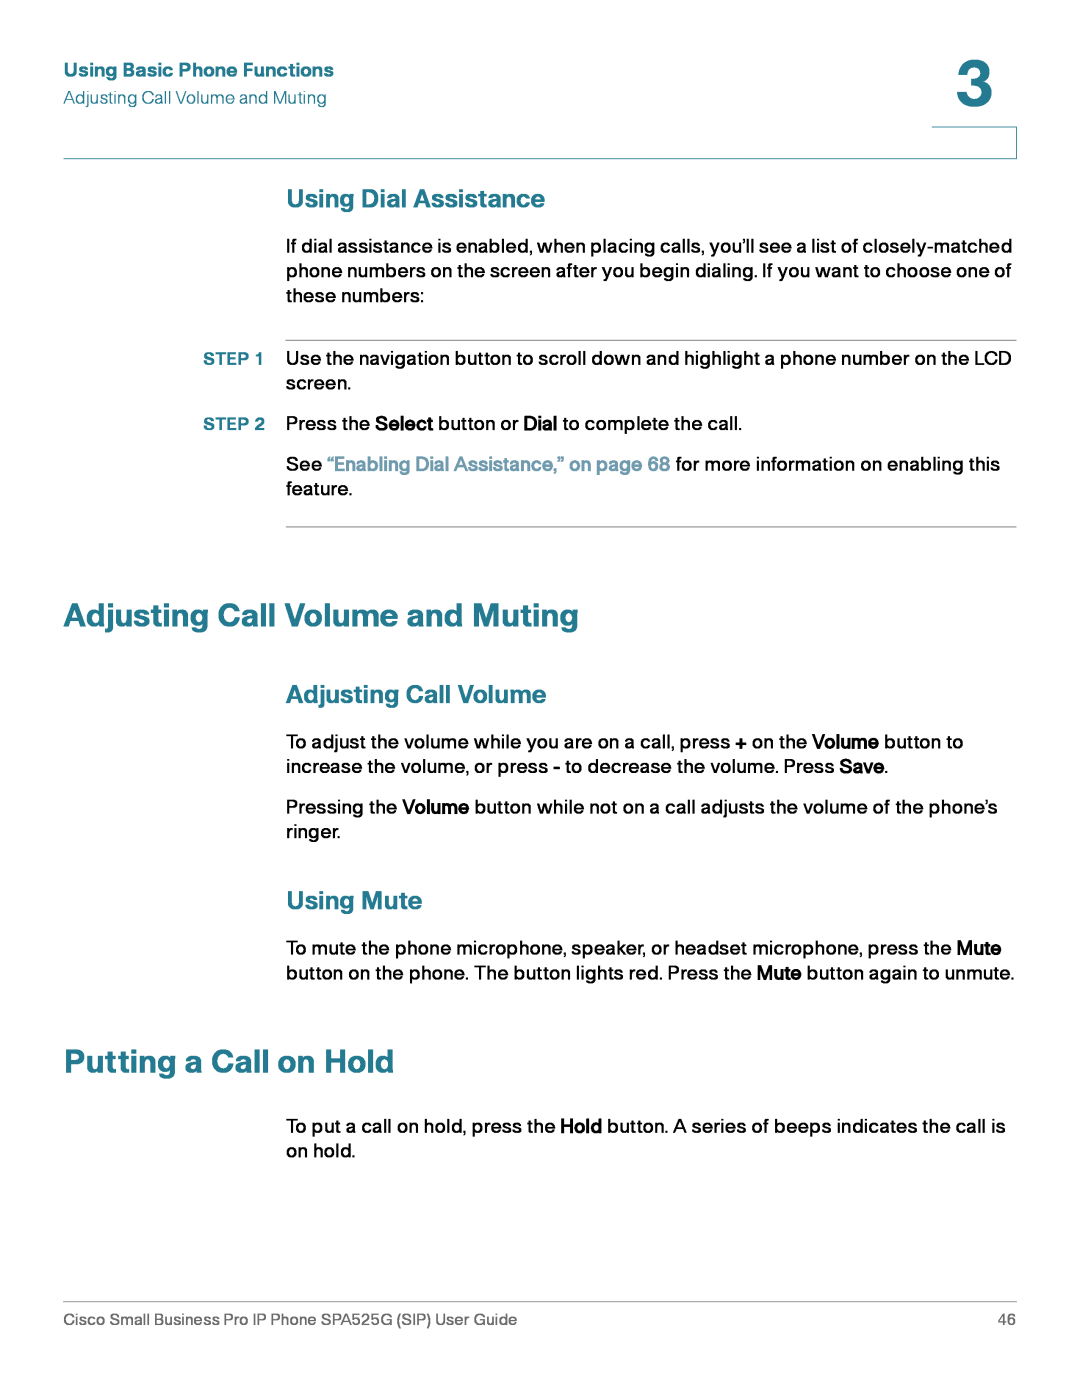 Cisco Systems SPA525G manual Adjusting Call Volume and Muting, Putting a Call on Hold, Using Dial Assistance, Using Mute 